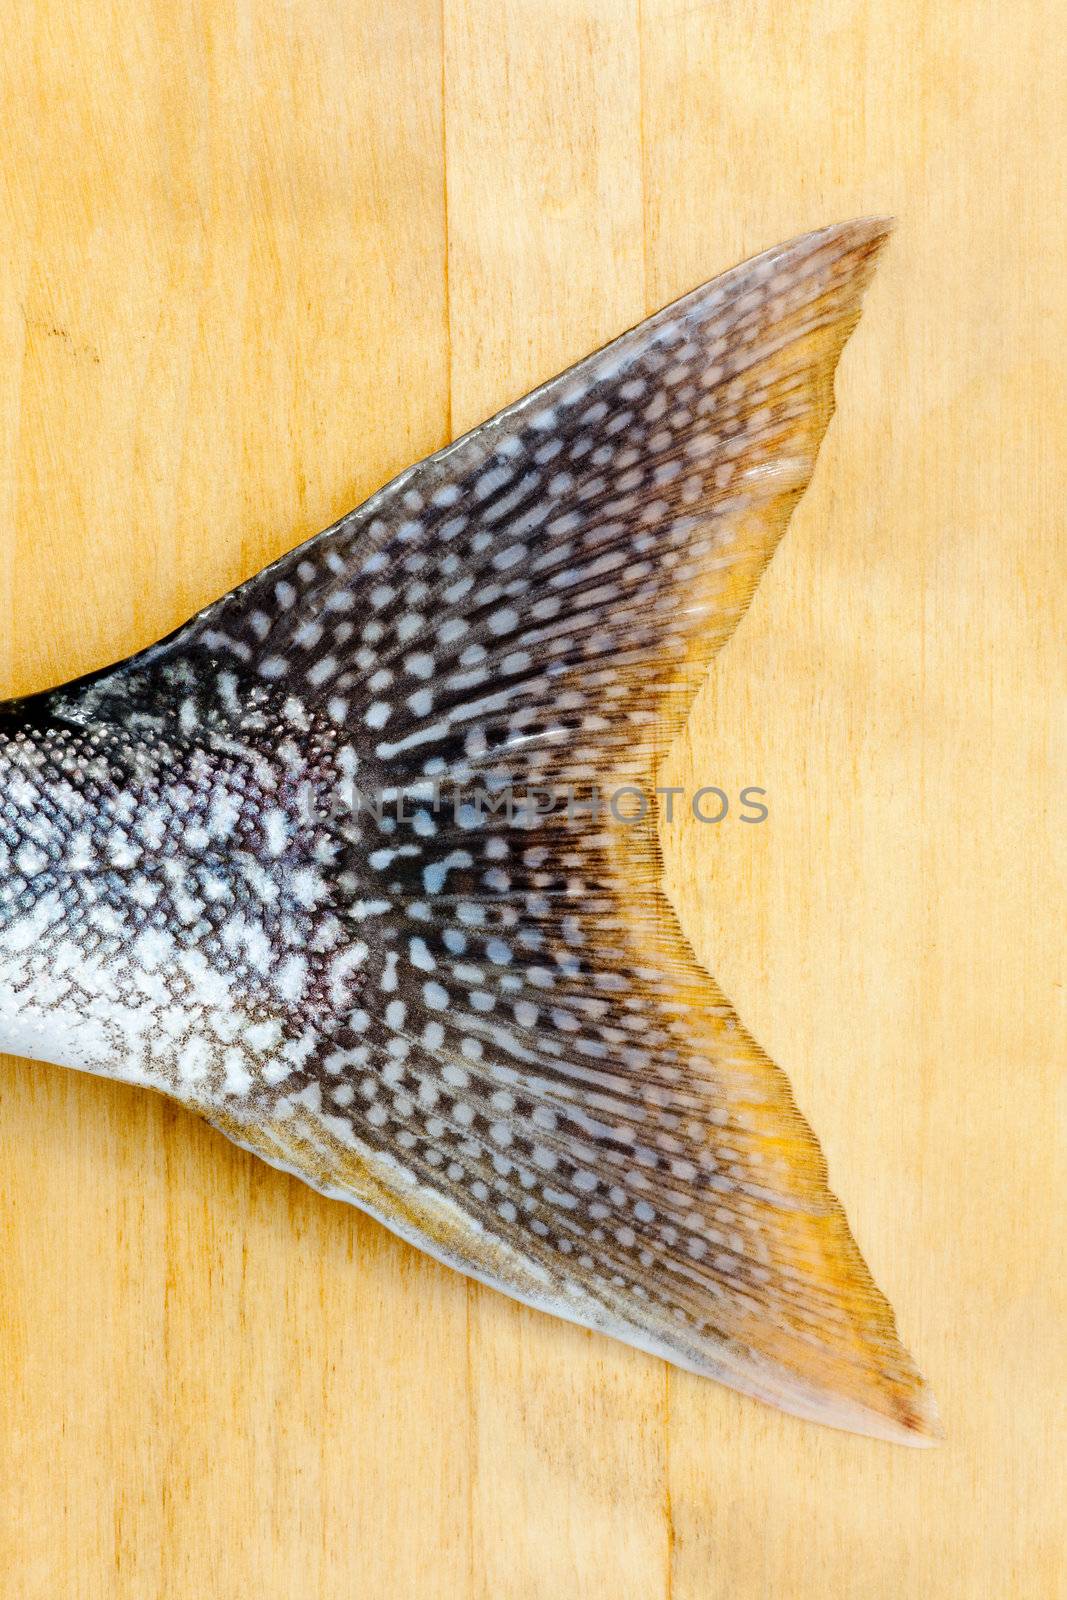 Tail fin of Lake Trout (Salvelinus namaycush) by PiLens